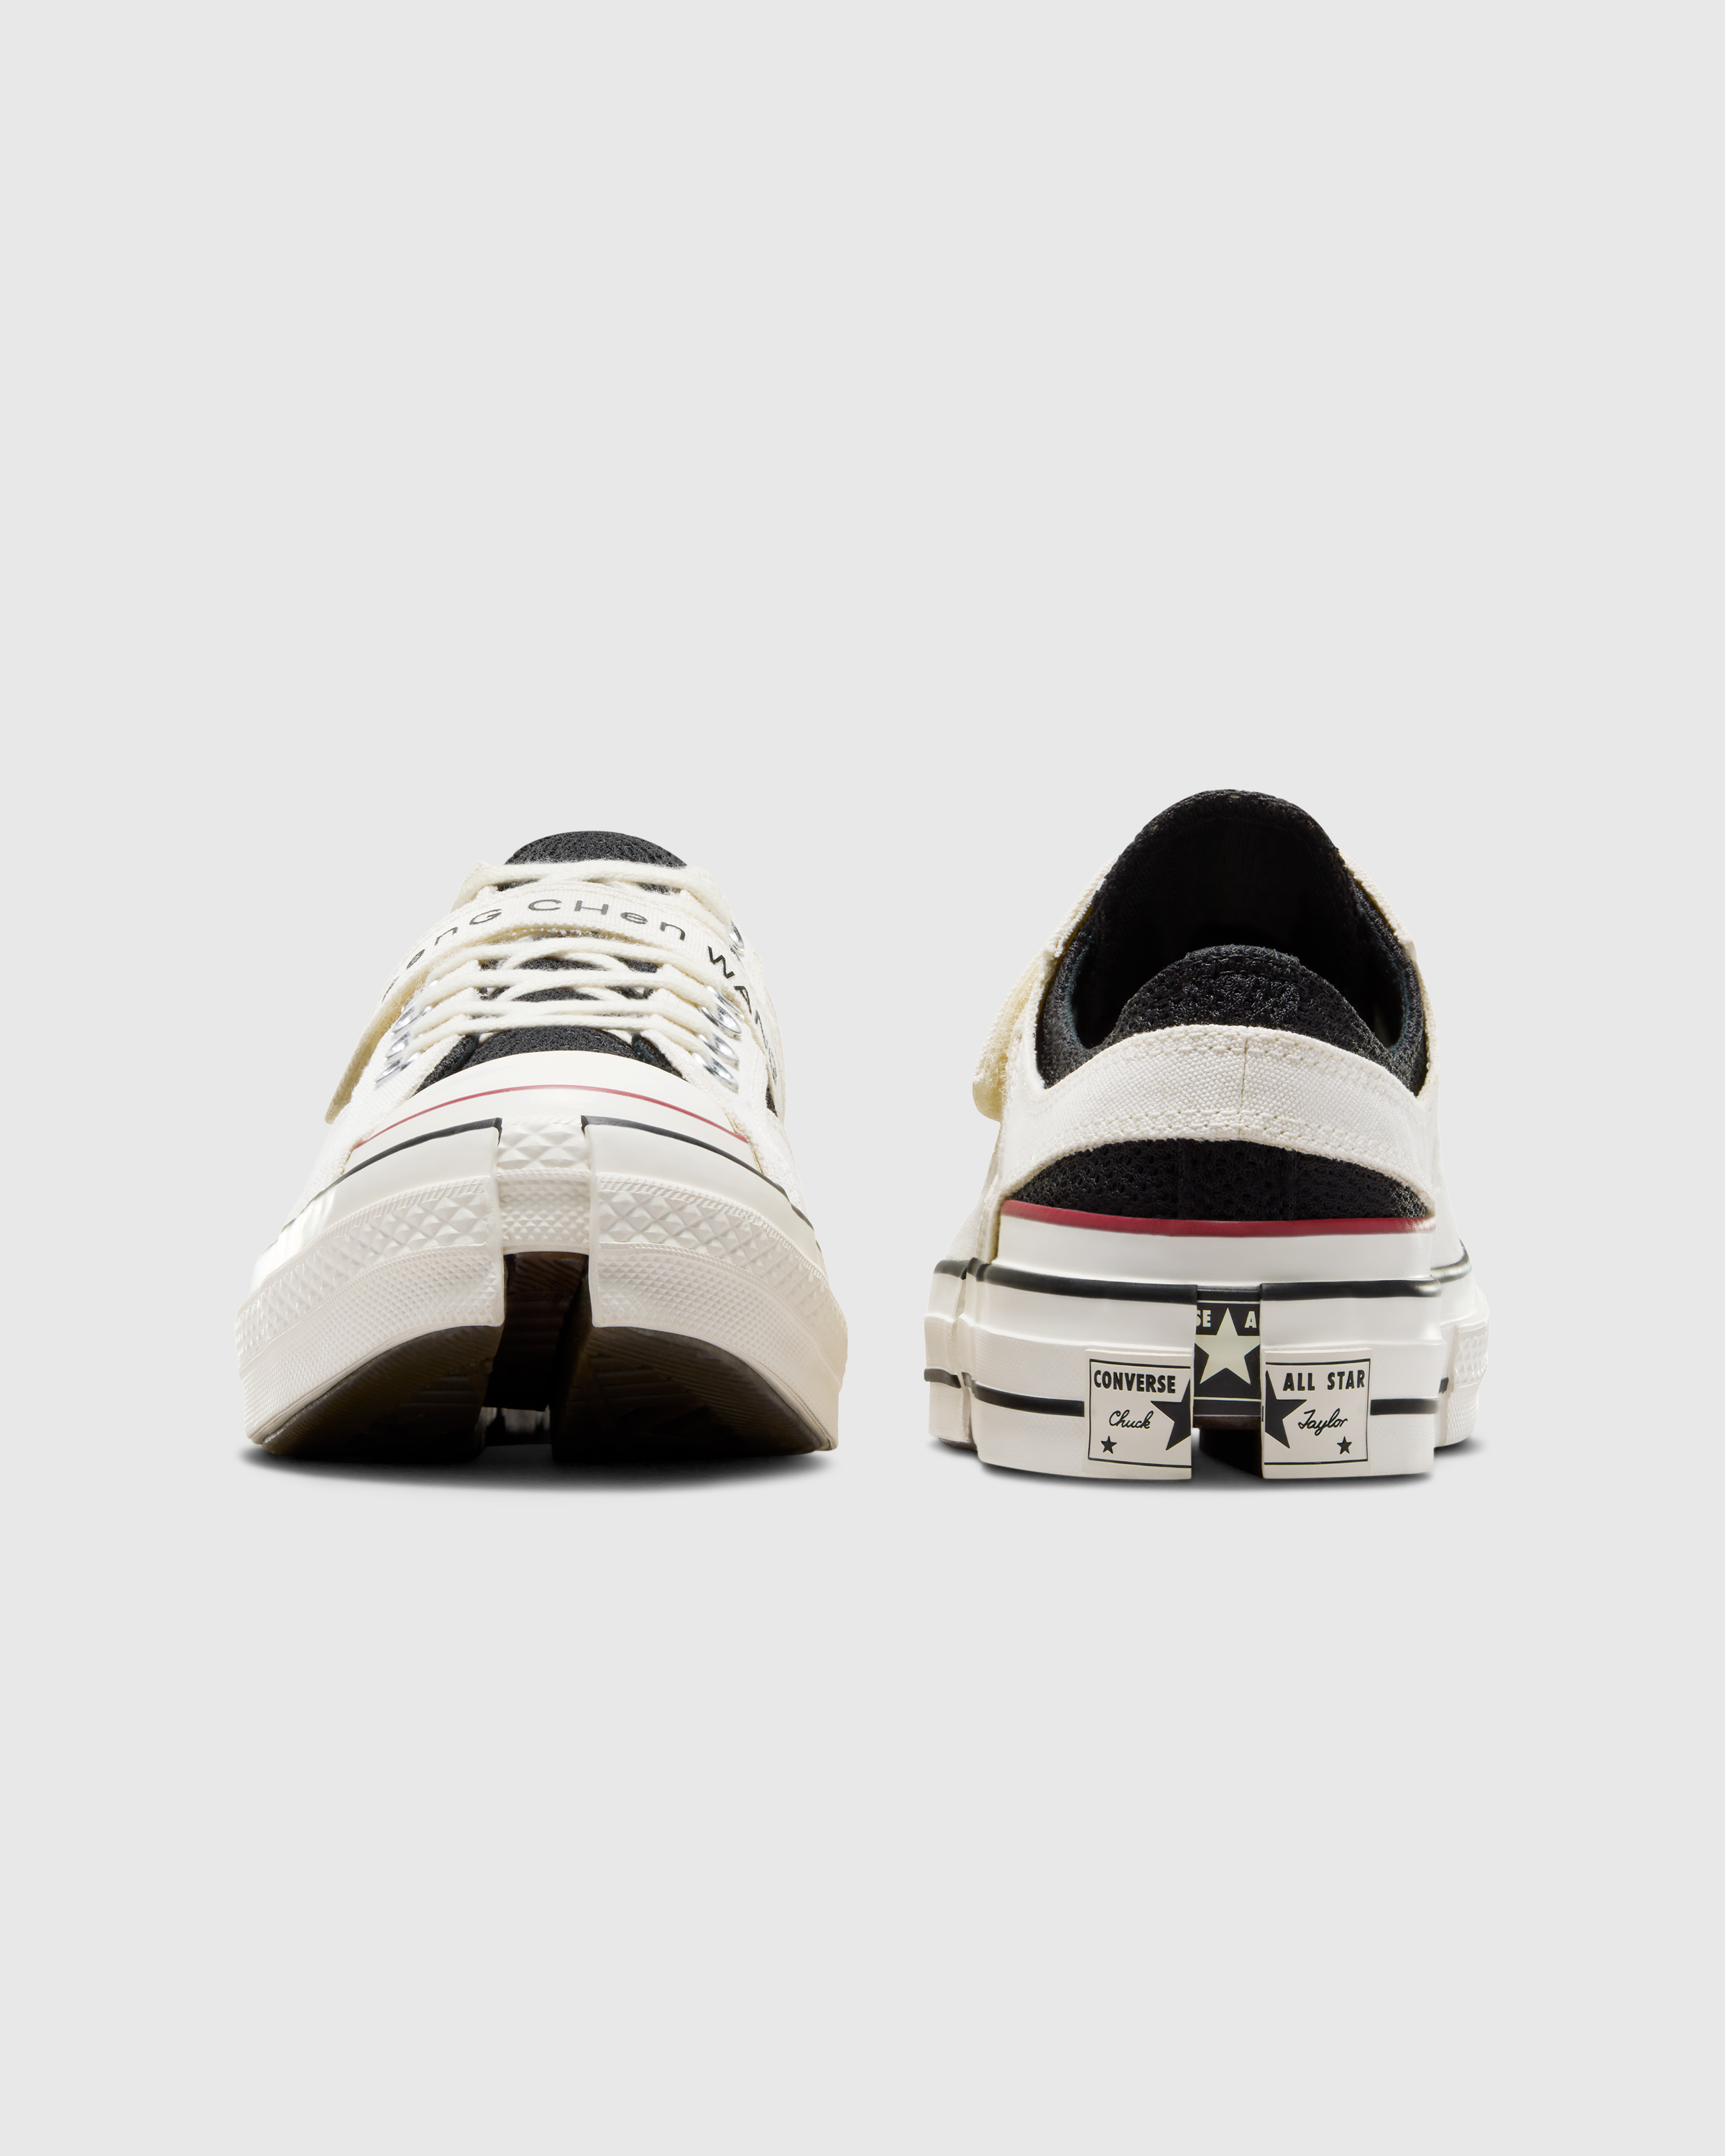 Feng Chen Wang x Converse – 2-in-1 Chuck 70 Black/Egret/Black - Low Top Sneakers - Black - Image 4